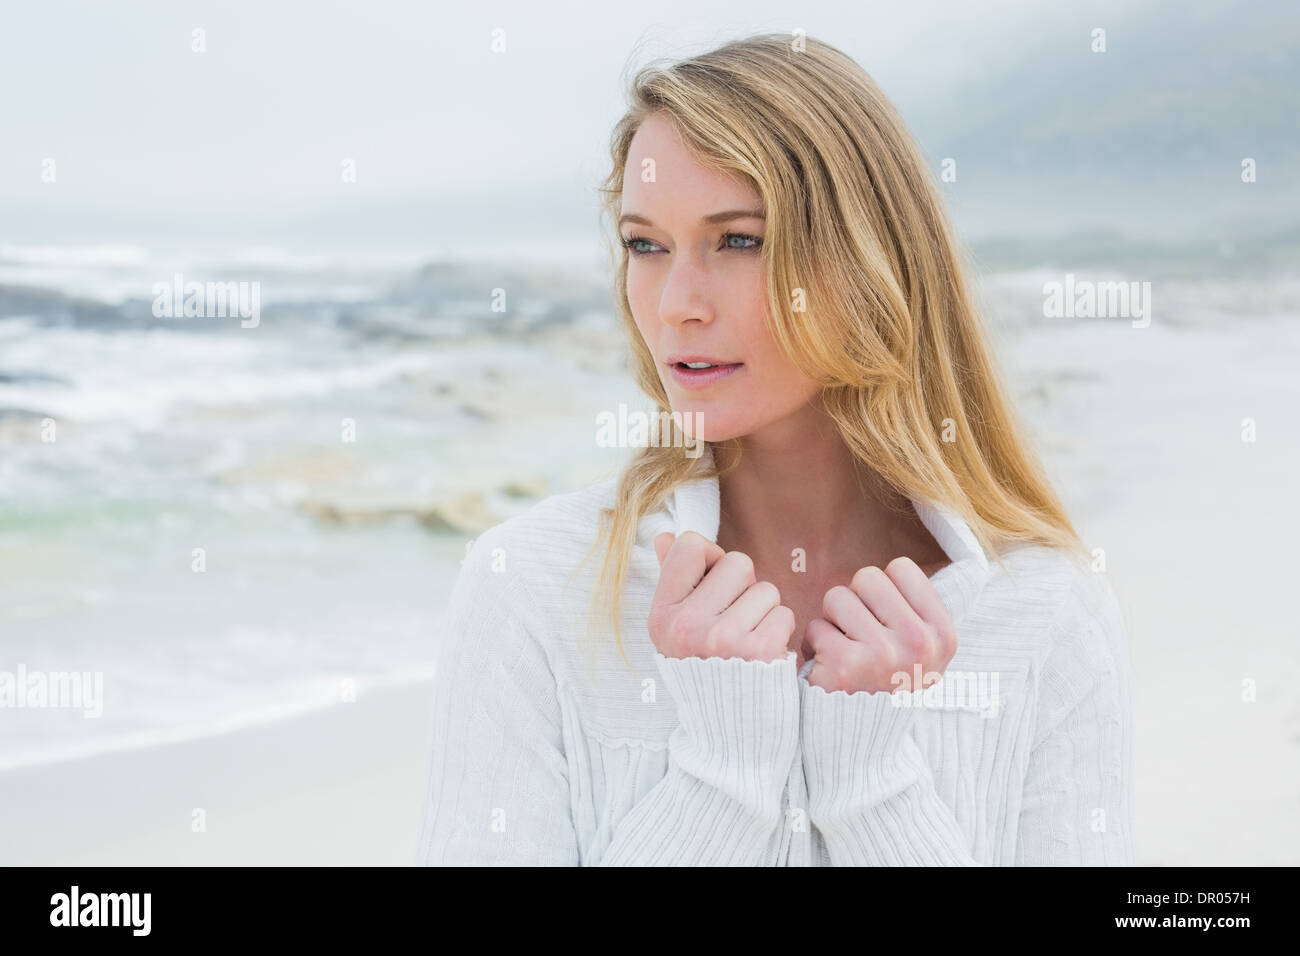 Contemplative casual young woman at beach Stock Photo